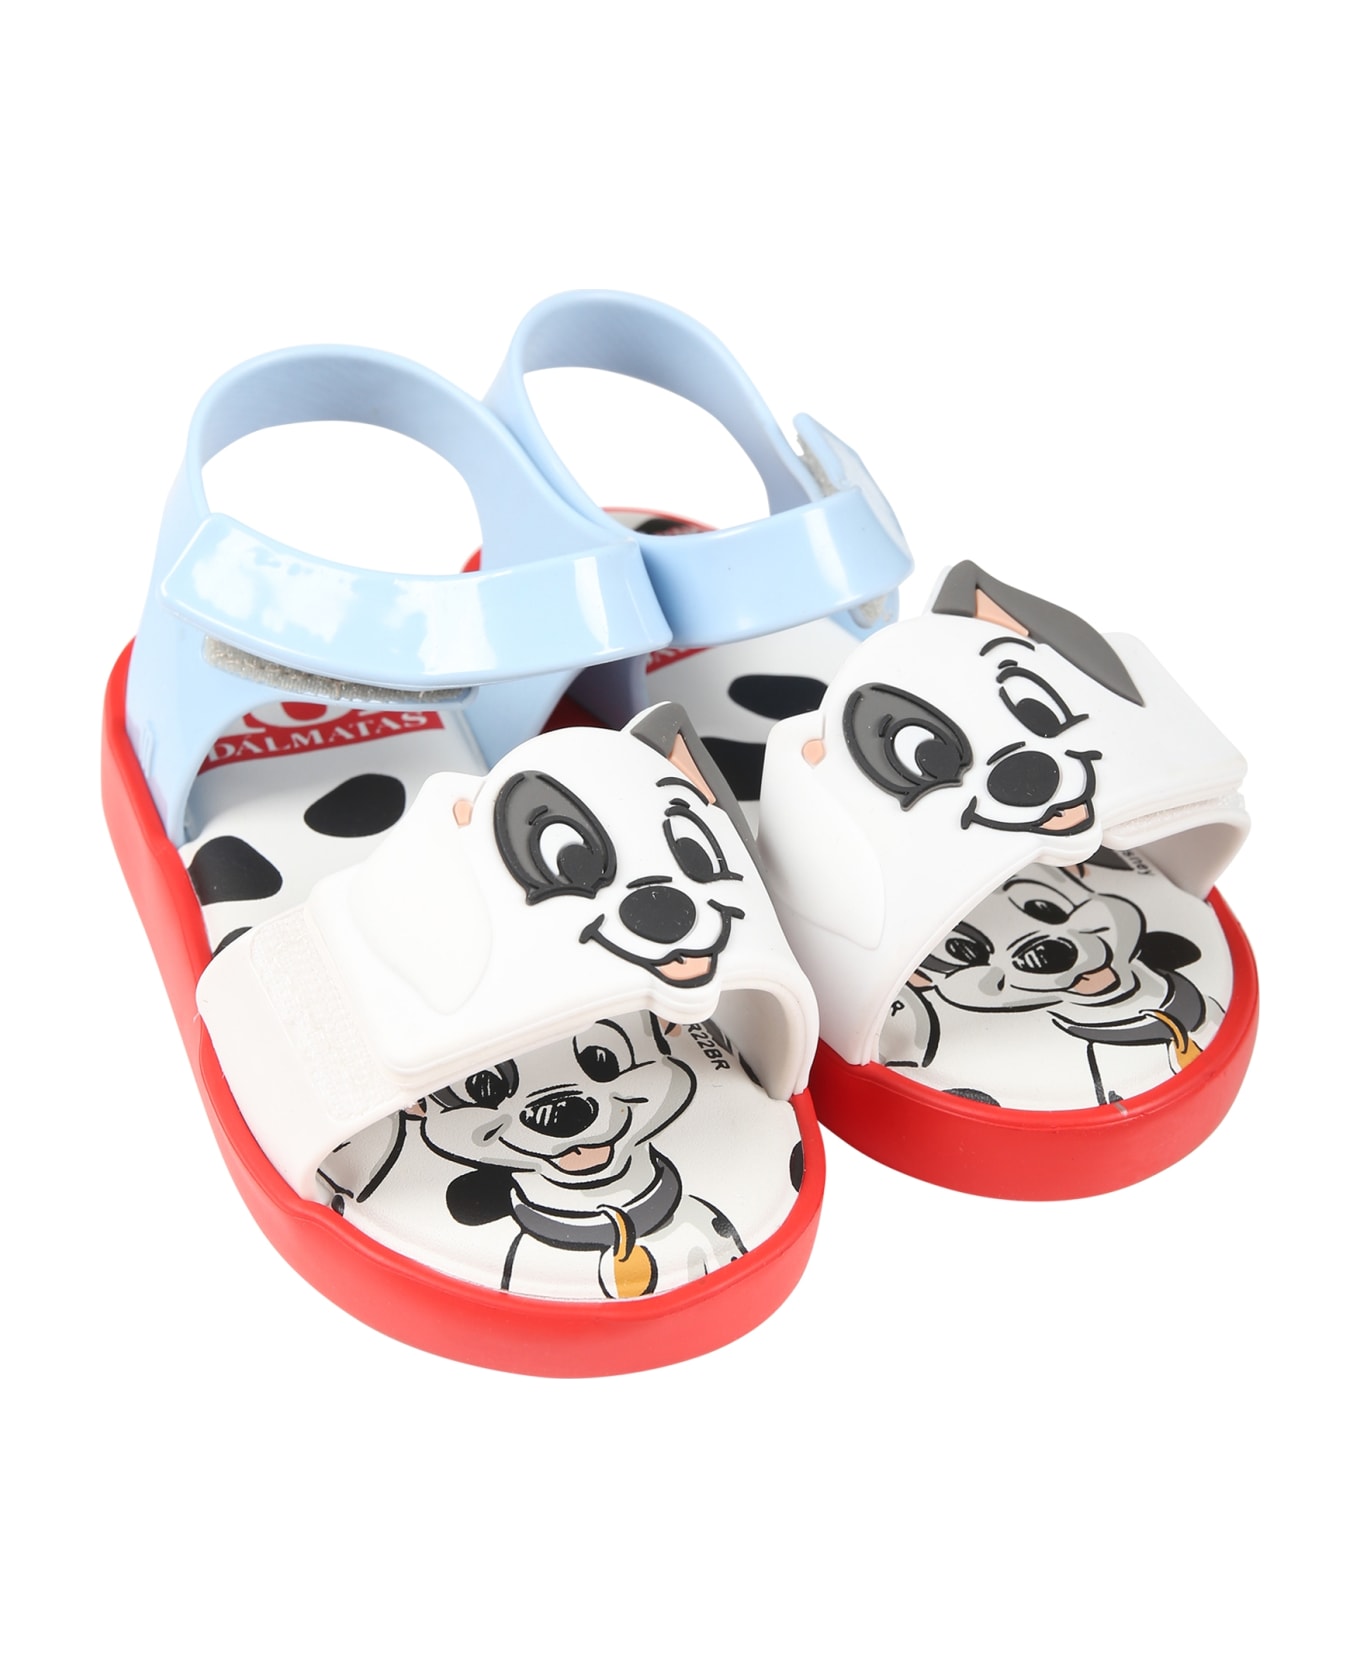 Melissa Red Sandals For Kids With 101 Dalmatians - Red